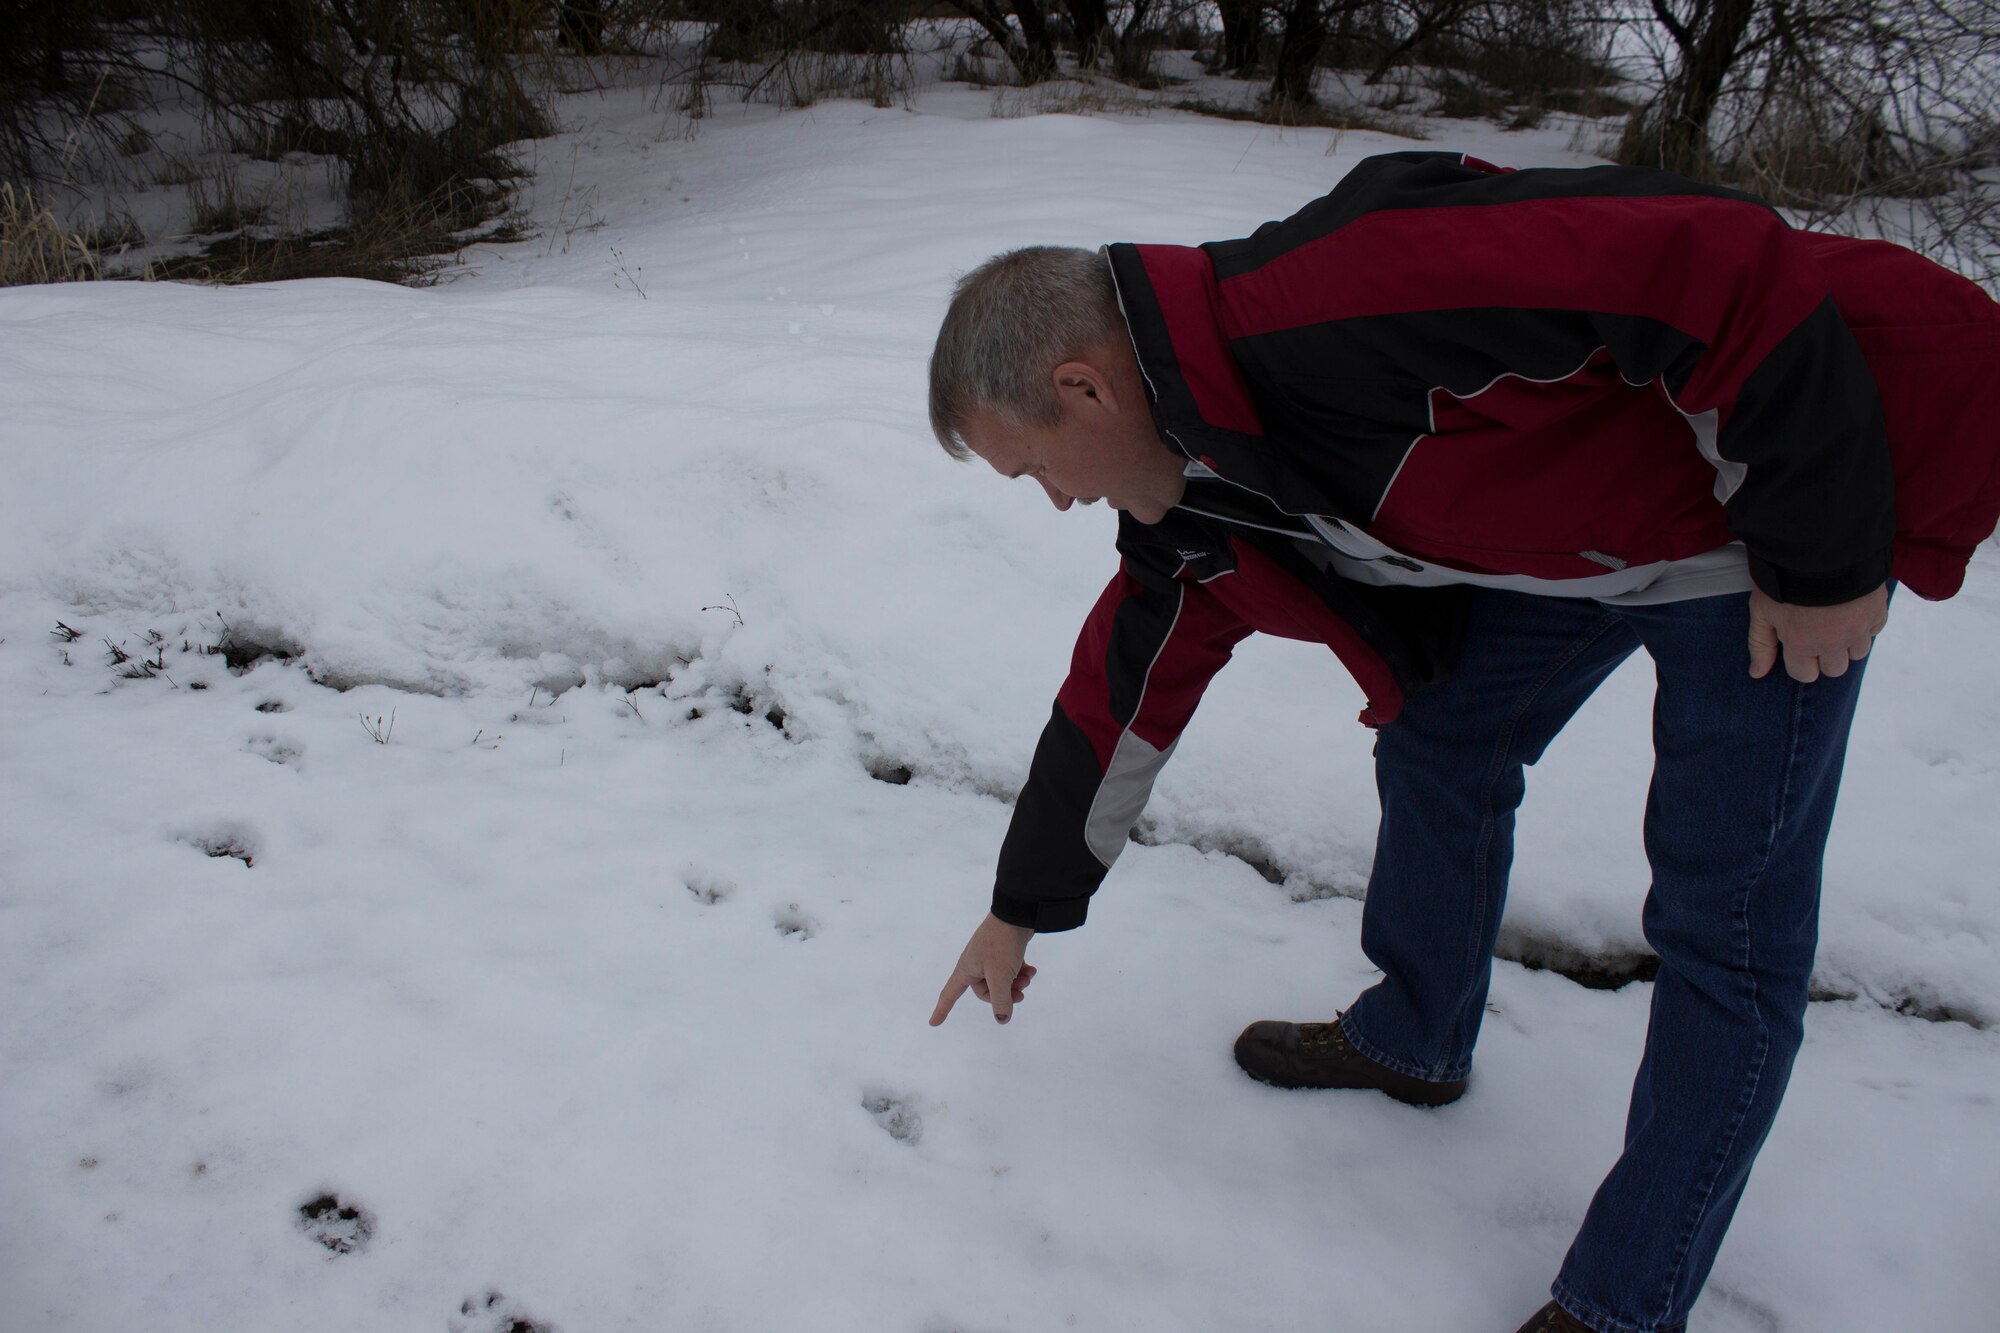 Don Teig, entomologist and subject matter expert at the Air Force Civil Engineer Center, points to coyote tracks in the snow at Fairchild Air Force Base, Washington, March 9, 2017. Wildlife at the base are potential hazards to aircraft on the runways and are a constant nuisance for base pest management experts. Teig assists bases with training for integrated pest management as a method for reducing pests. (U.S. Air Force photo by Susan Lawson).